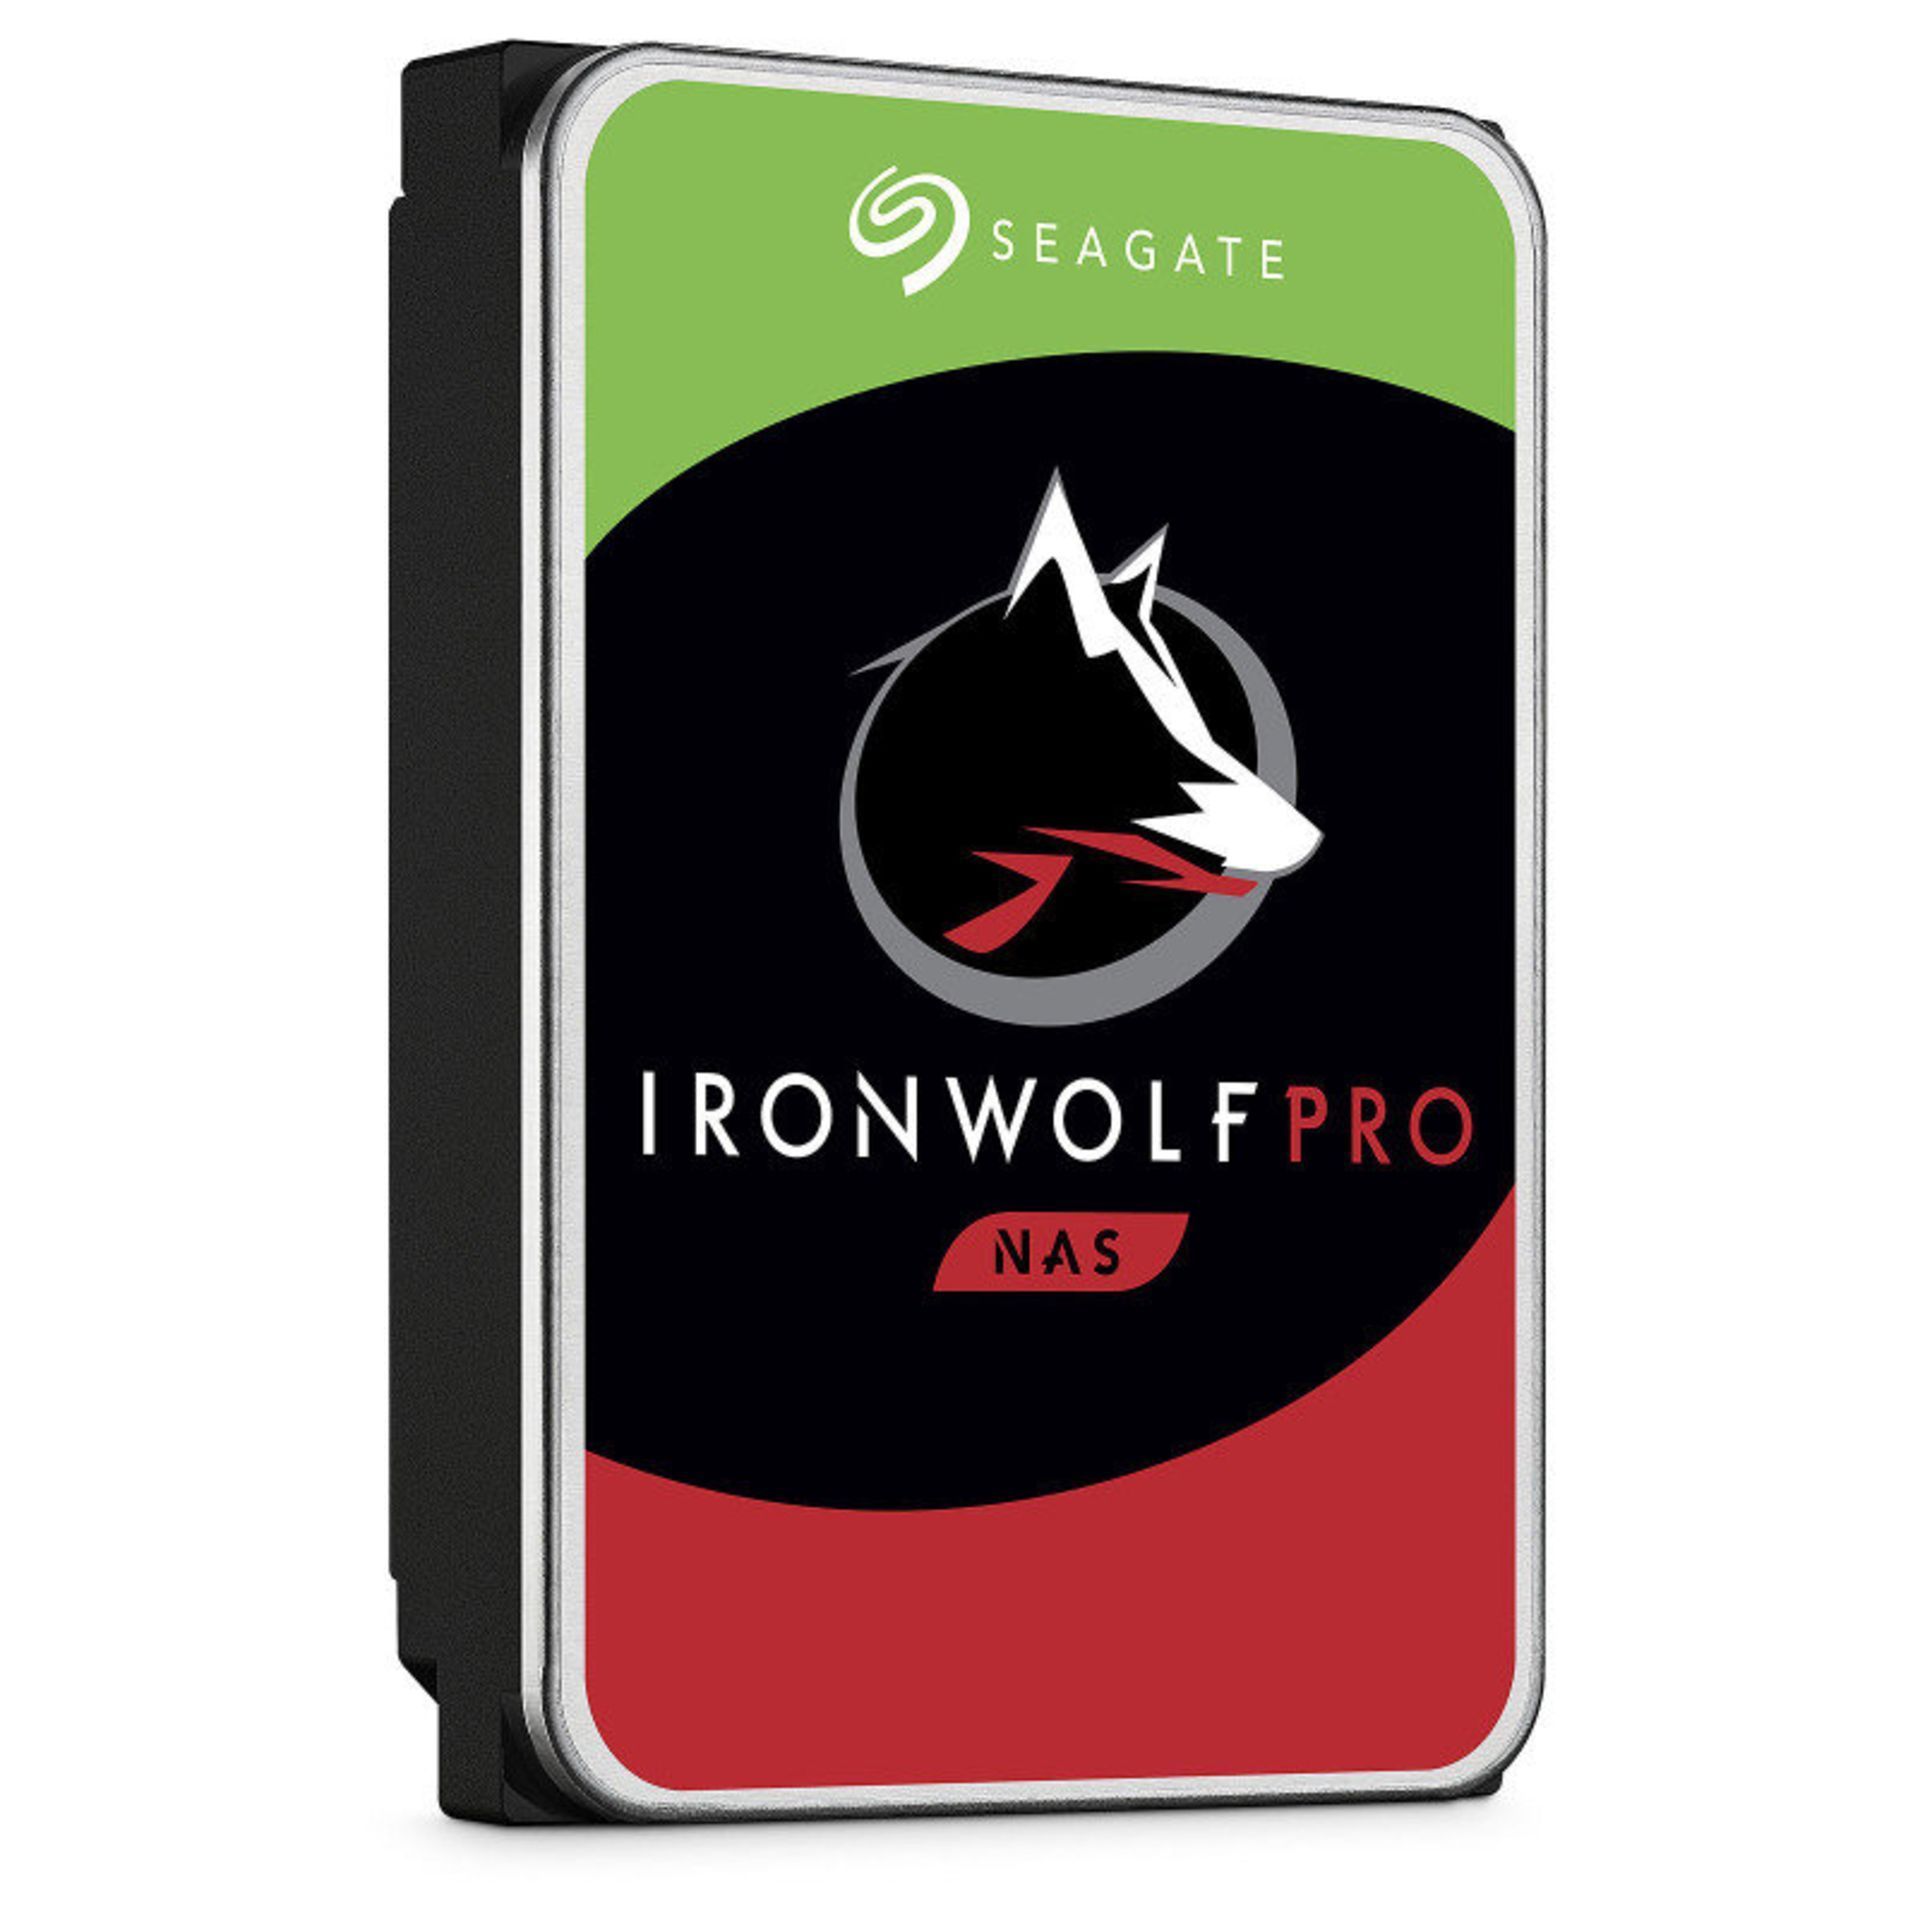 NEW & BOXED SEAGATE IronWolf Pro 10TB NAS Hard Drive 3.5" 7200RPM 256MB Cache. RRP £287.98. IronWolf - Image 2 of 2